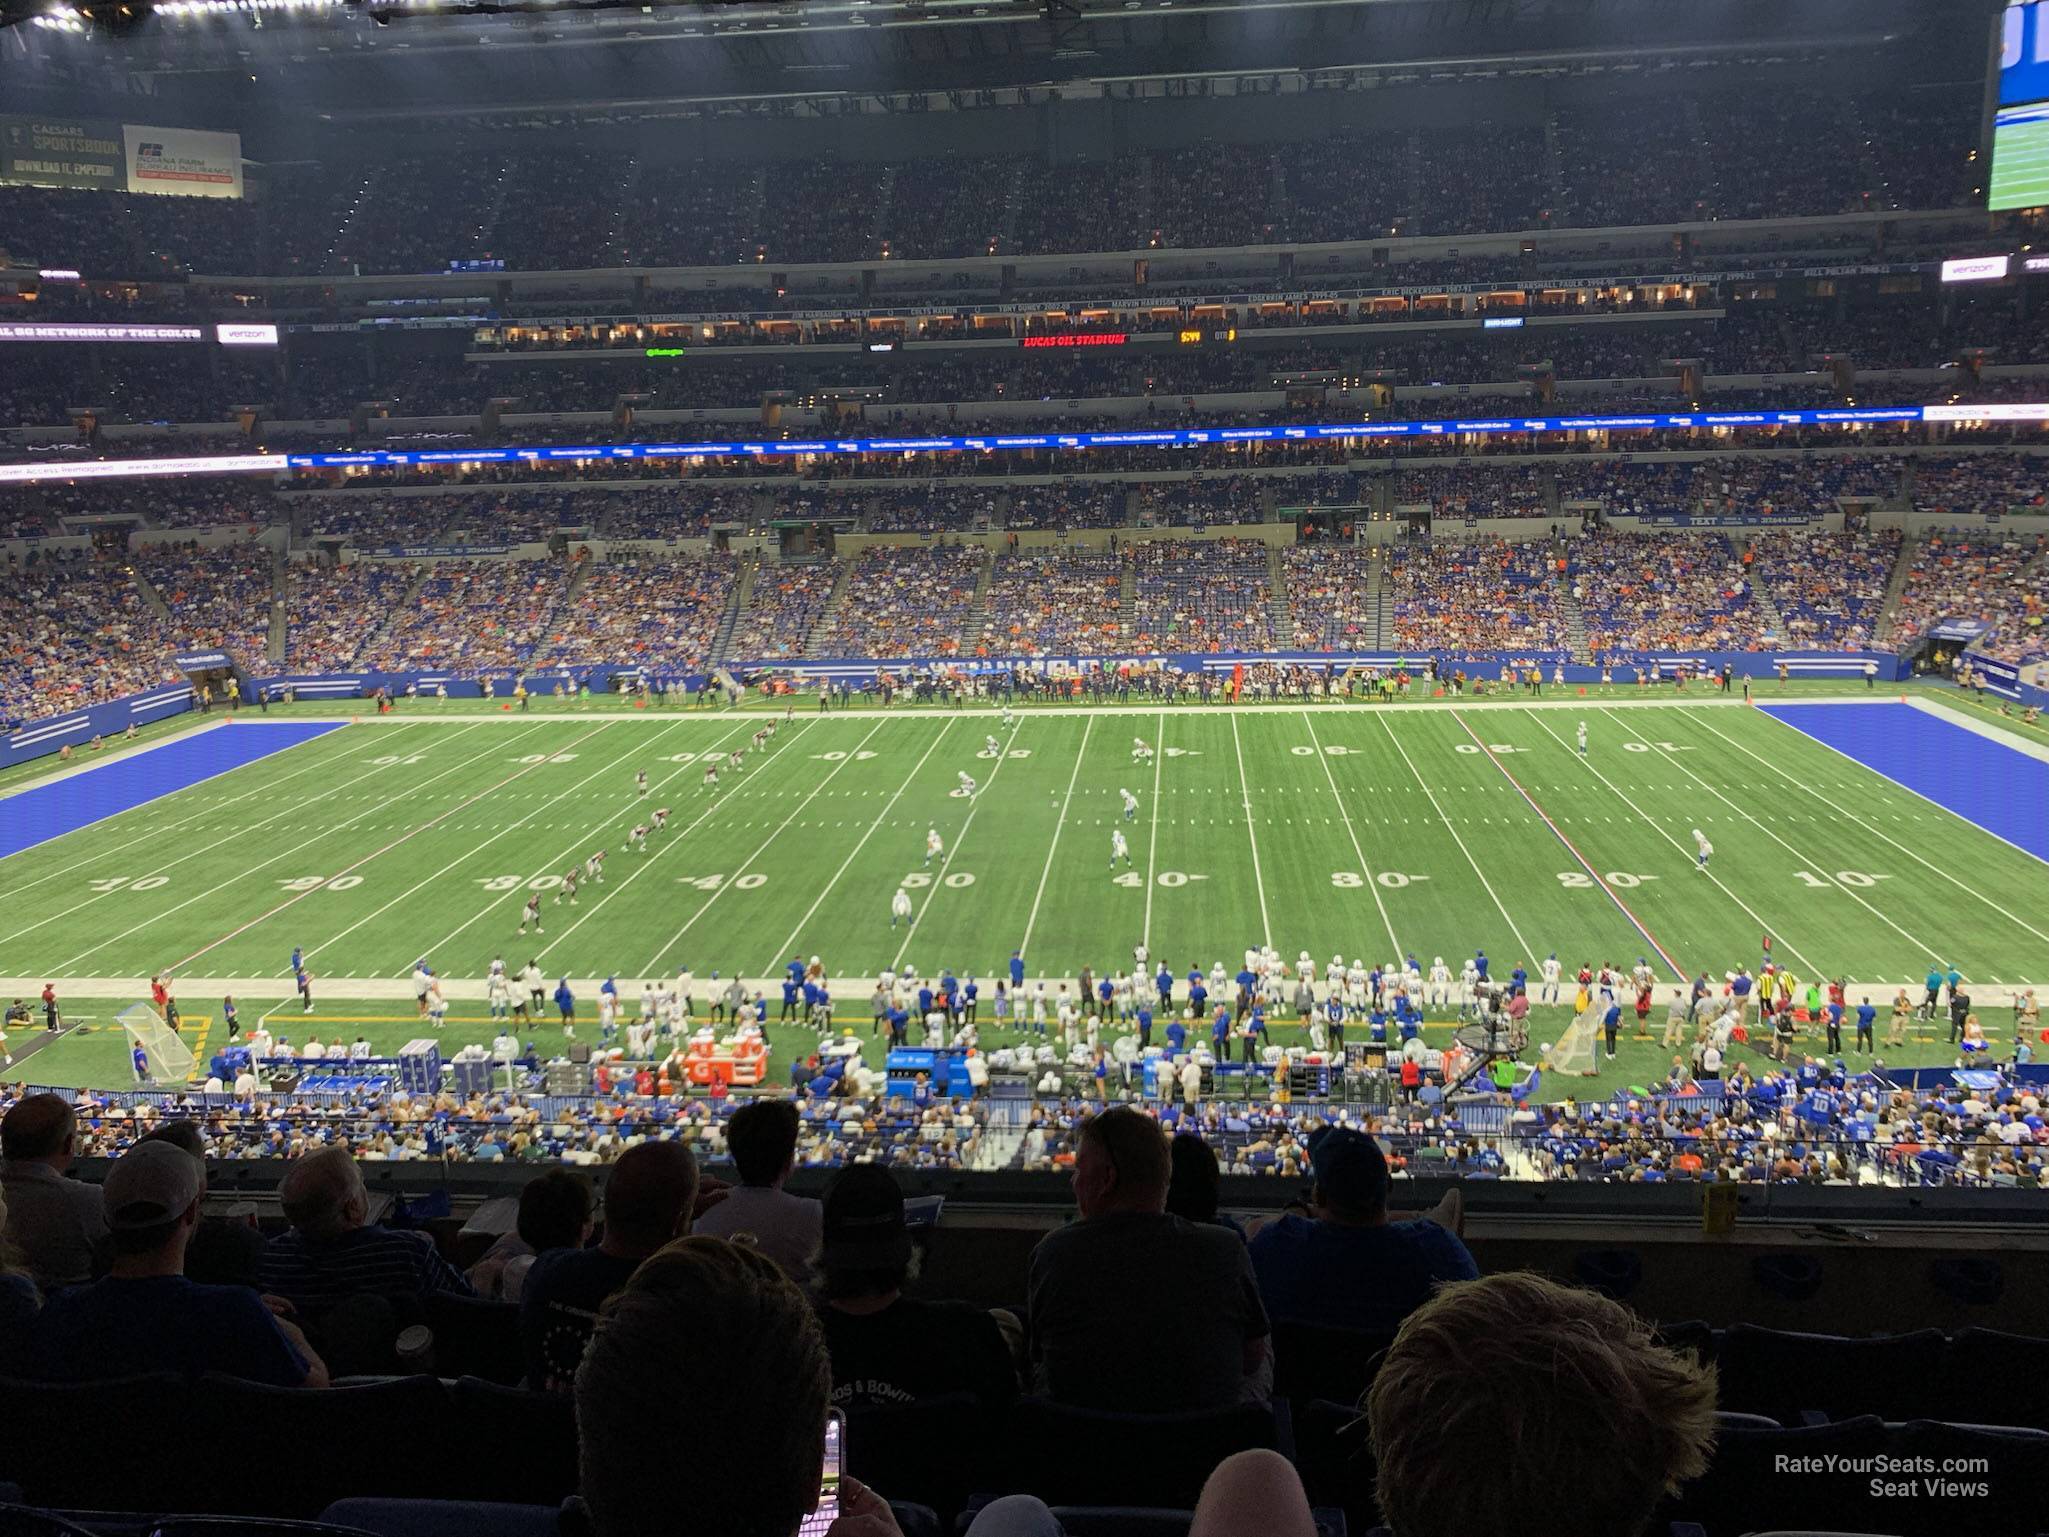 section 339, row 4n seat view  for football - lucas oil stadium